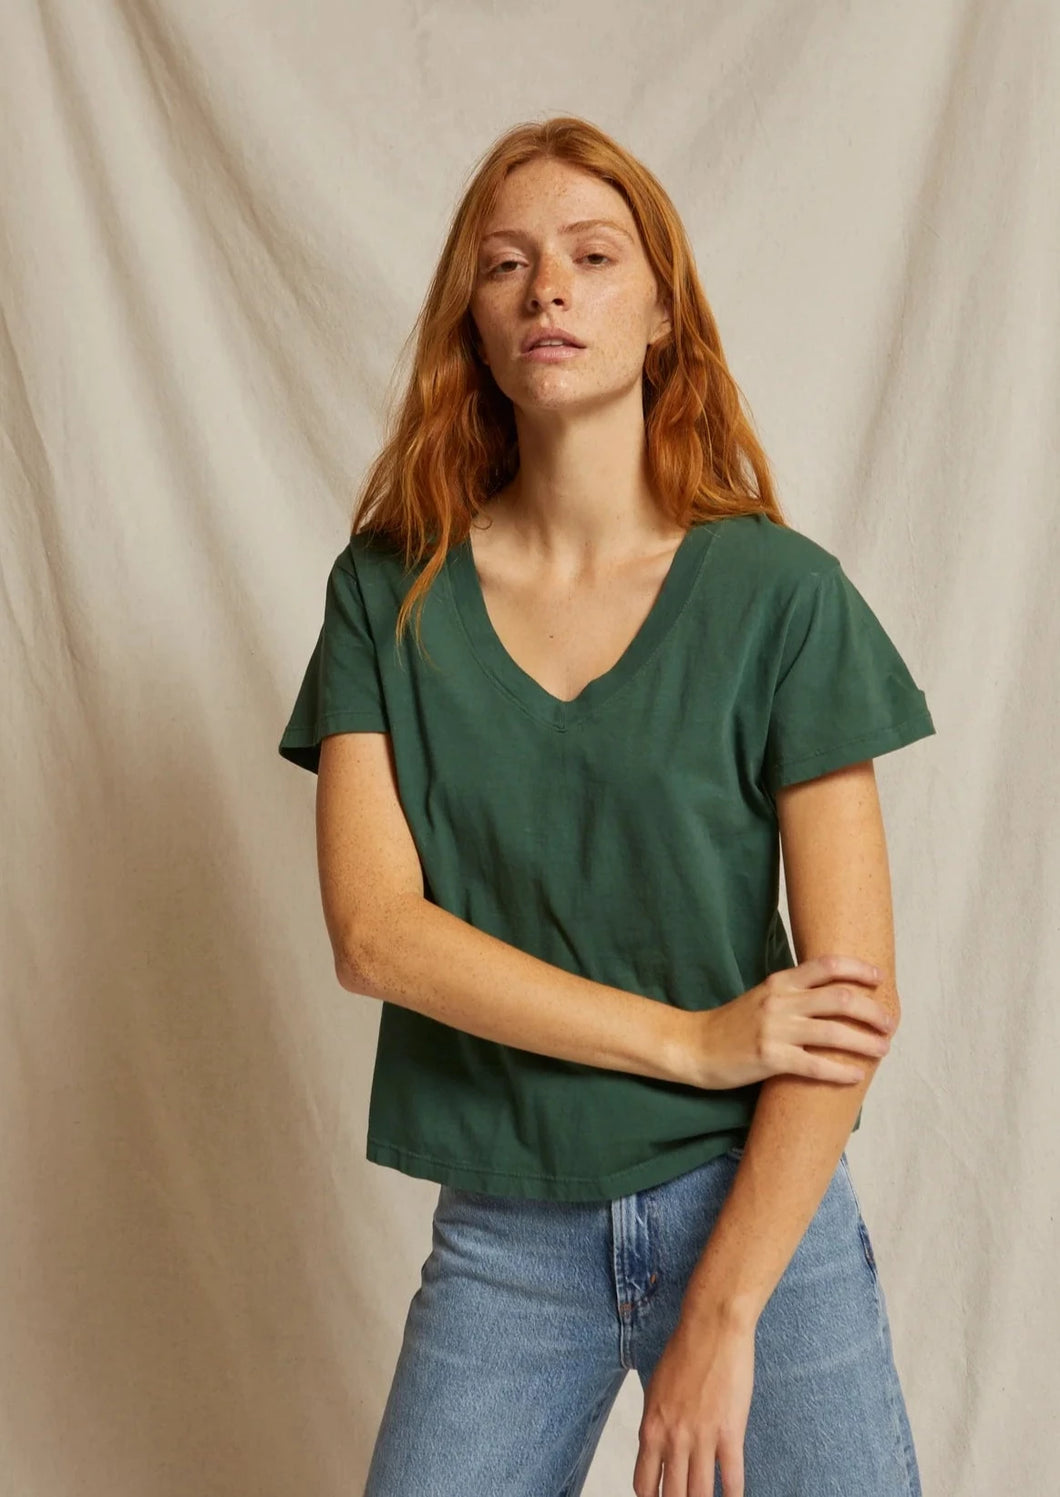 Perfect White Tee in Evergreen, available at west2westport.com